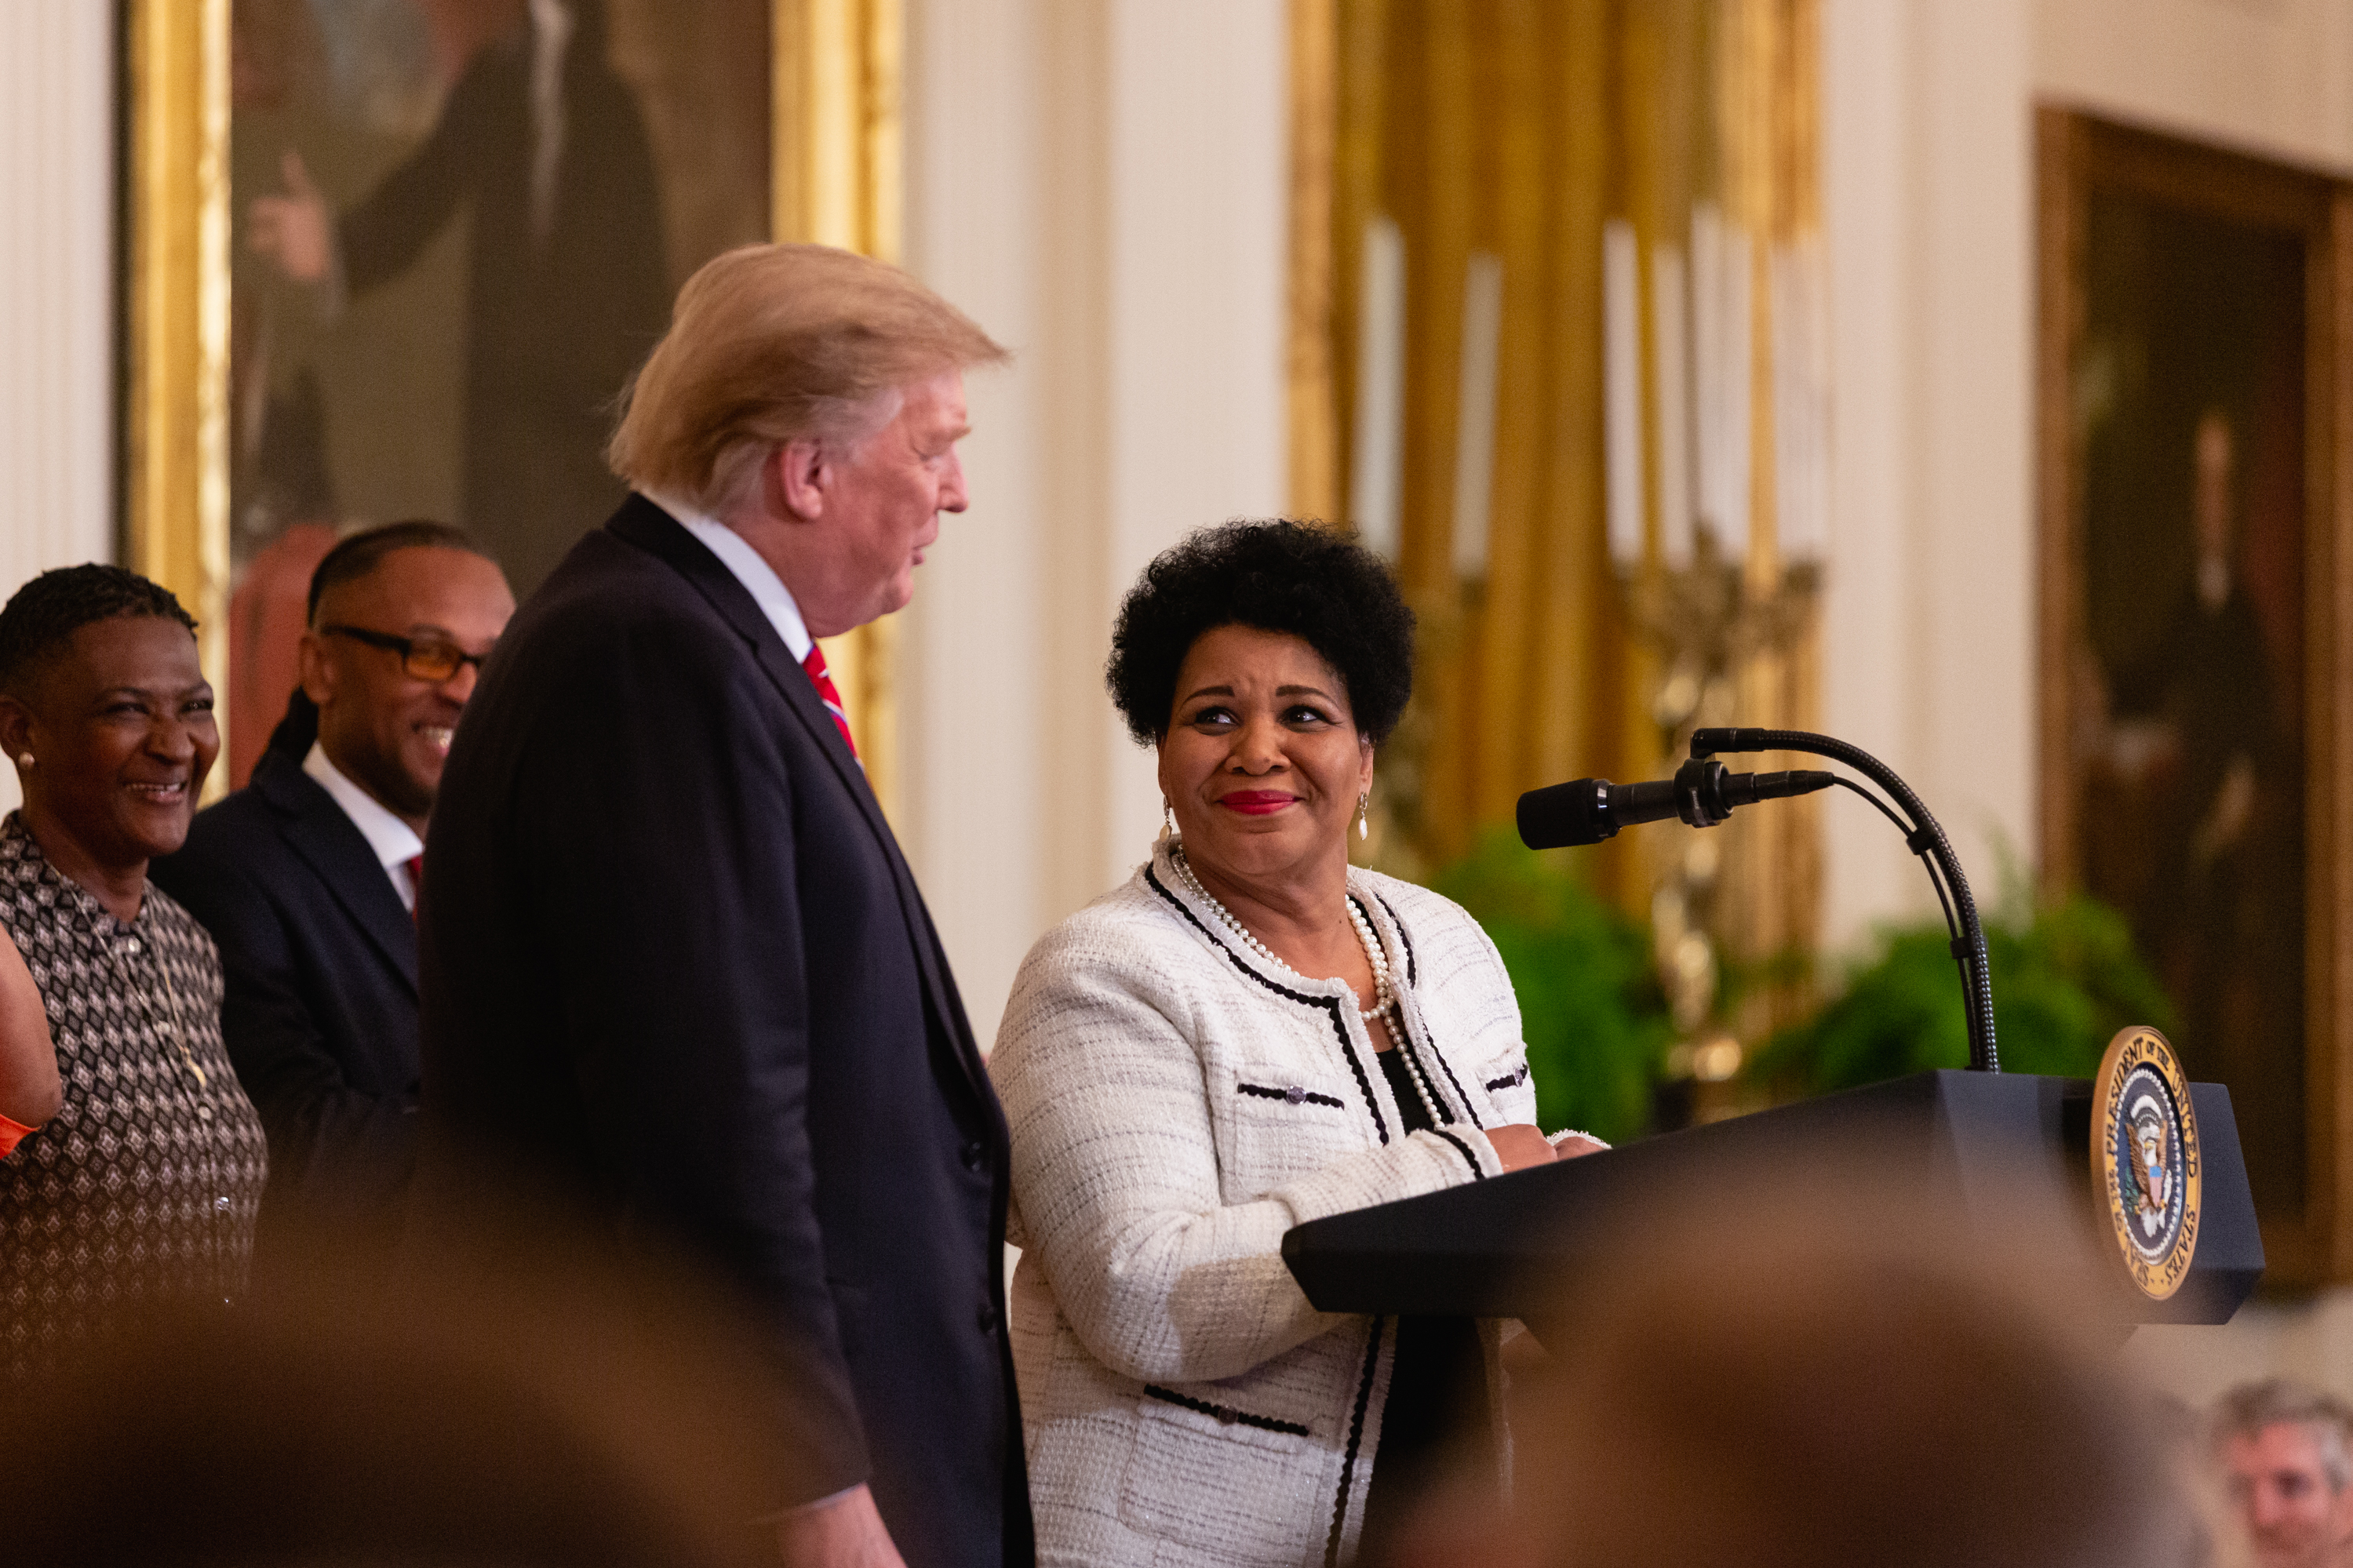 Alice Marie Johnson speaks at the 2019 White House Prison Reform Summit and First Step Act celebration at the White House in Washington, D.C. on Monday, April 1, 2019. (Cheriss May—NurPhoto/Getty Images)